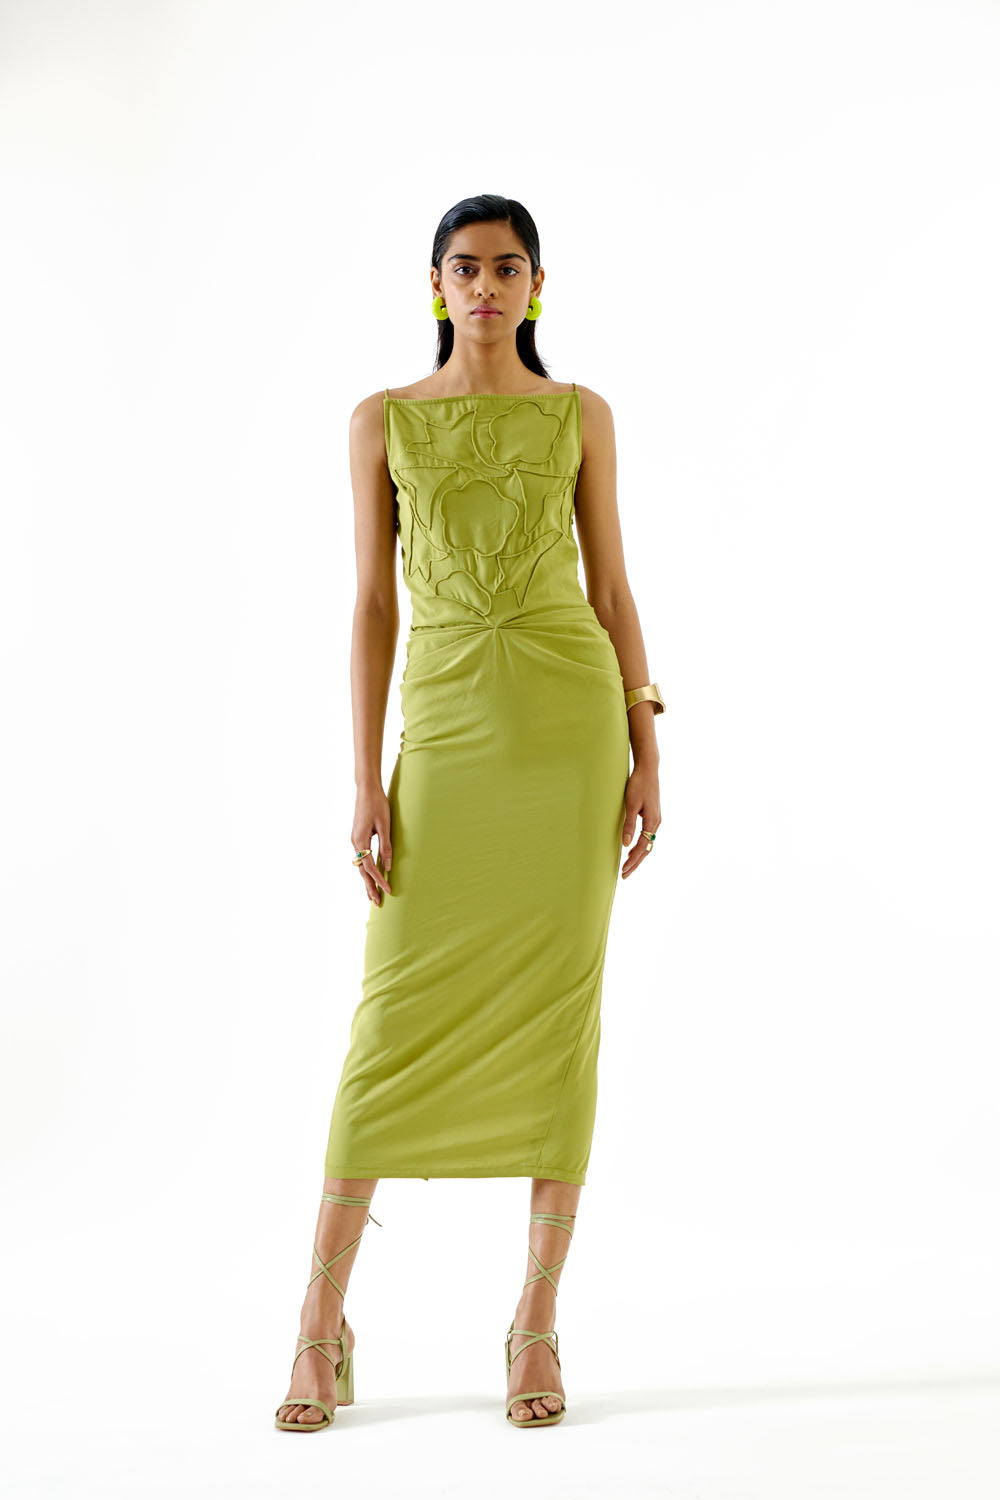 Knotted Green Dress